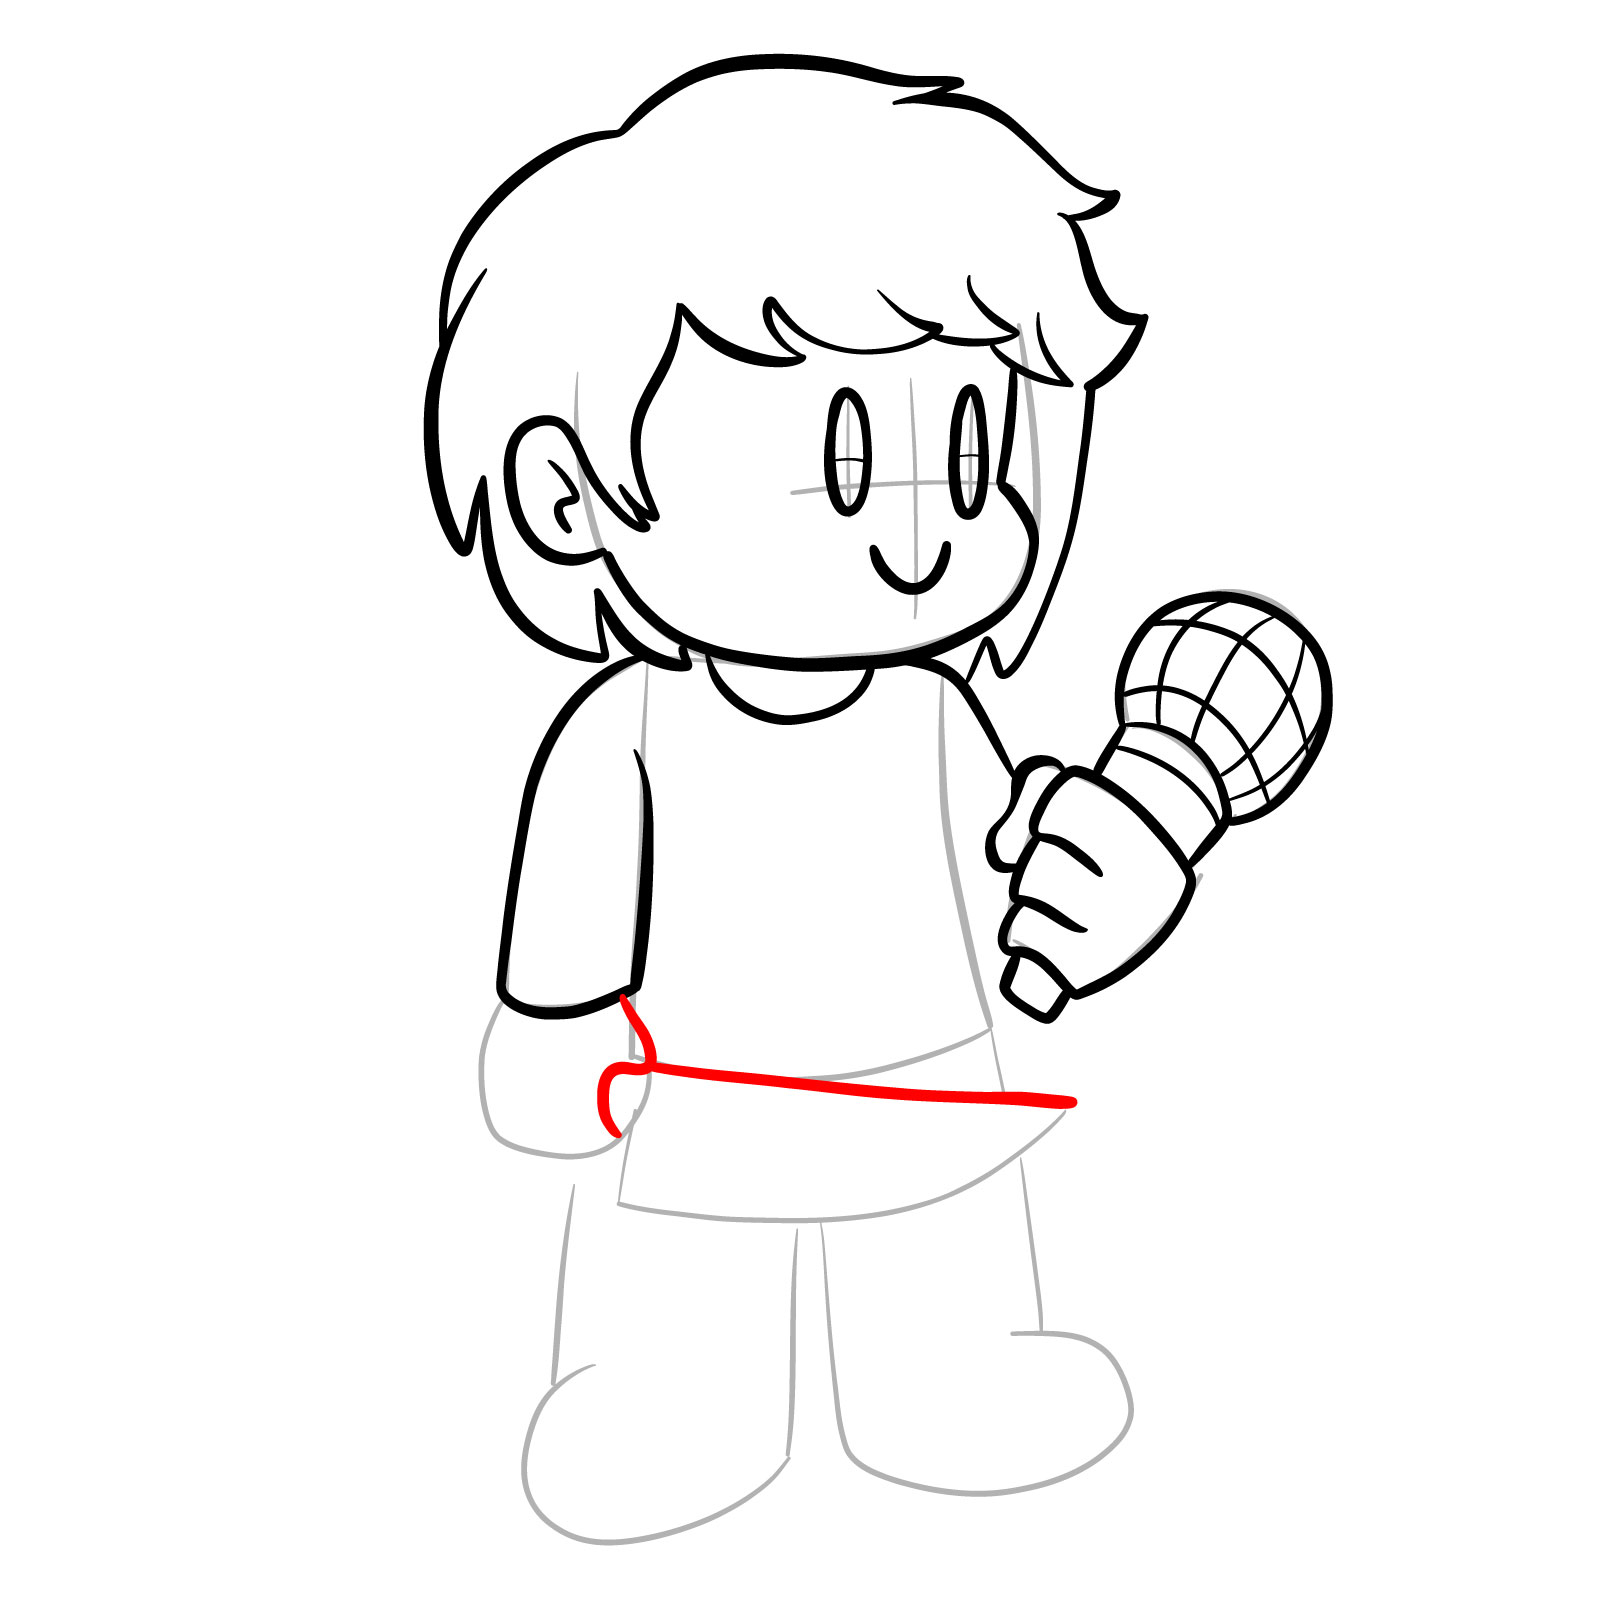 How to draw Chara from FNF - step 20